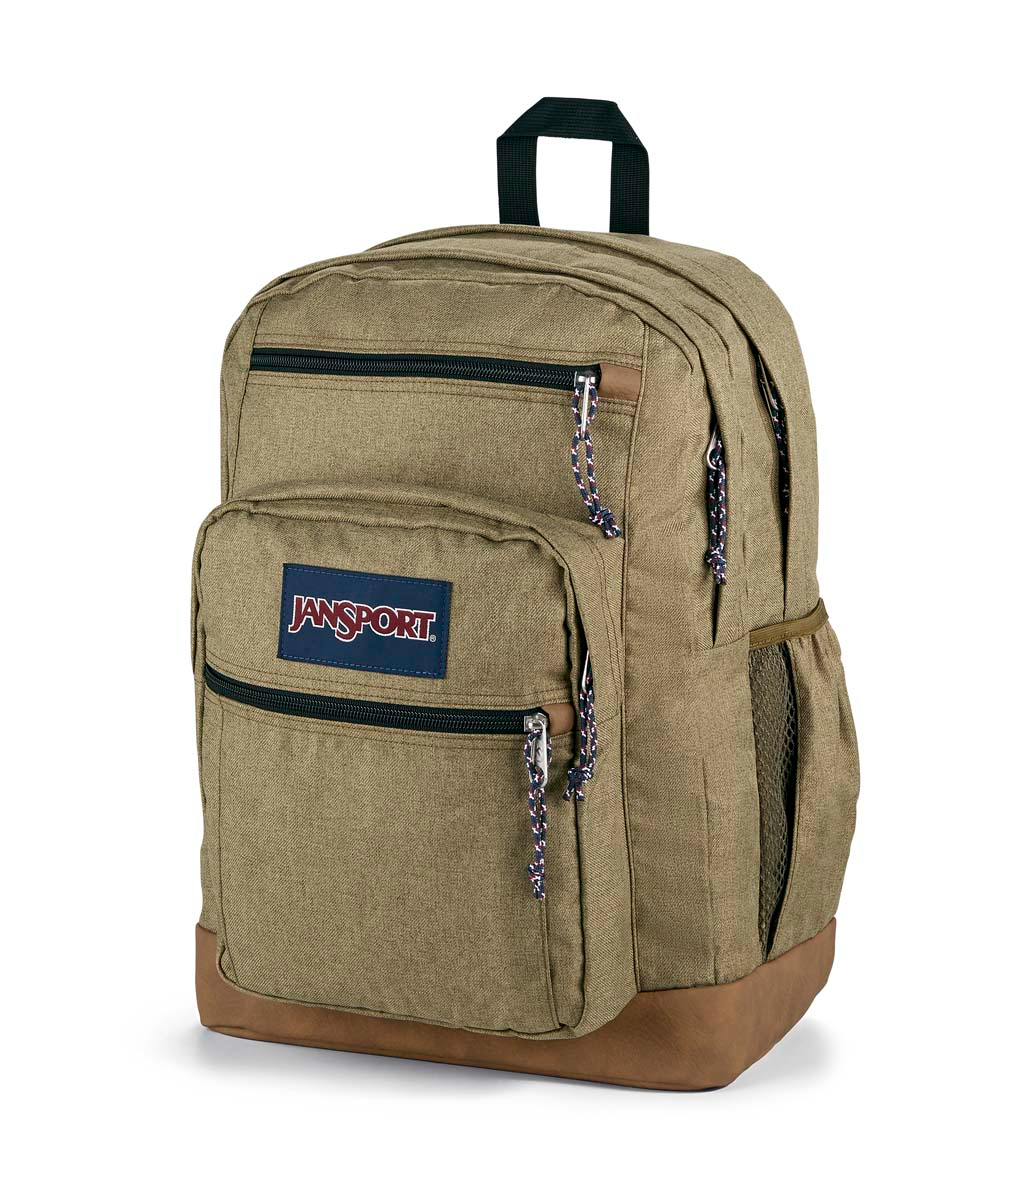 JANSPORT COOL STUDENT ARMY GREEN LETTERMAN POLY